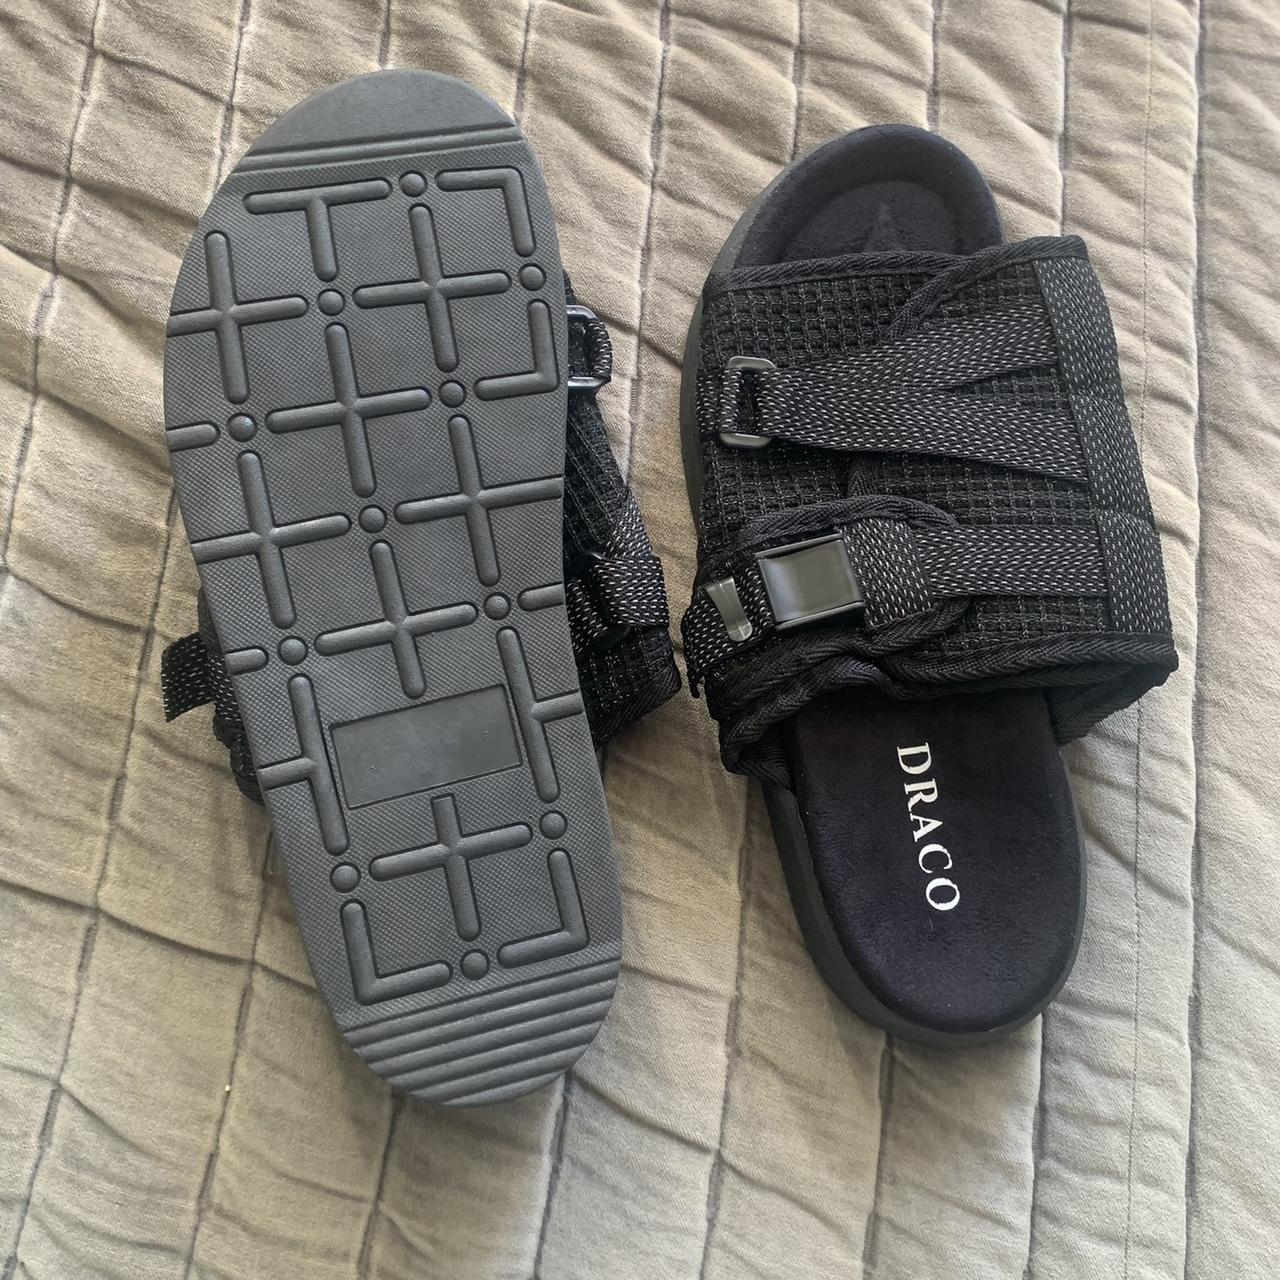 draco slides “thunder” colorway also reflects when... - Depop